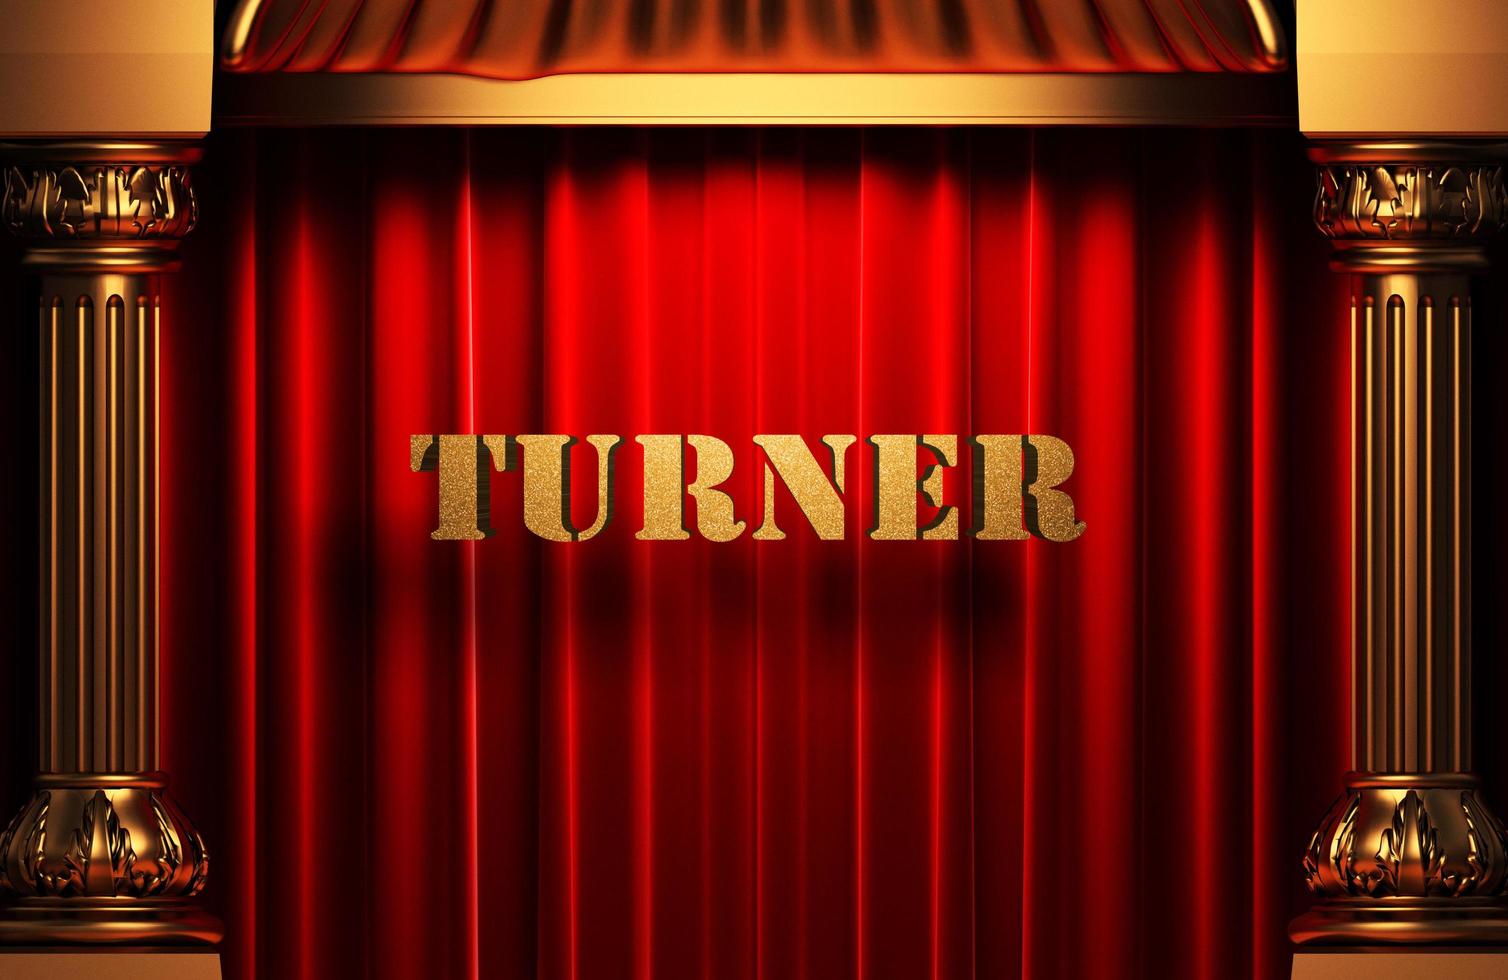 turner golden word on red curtain photo